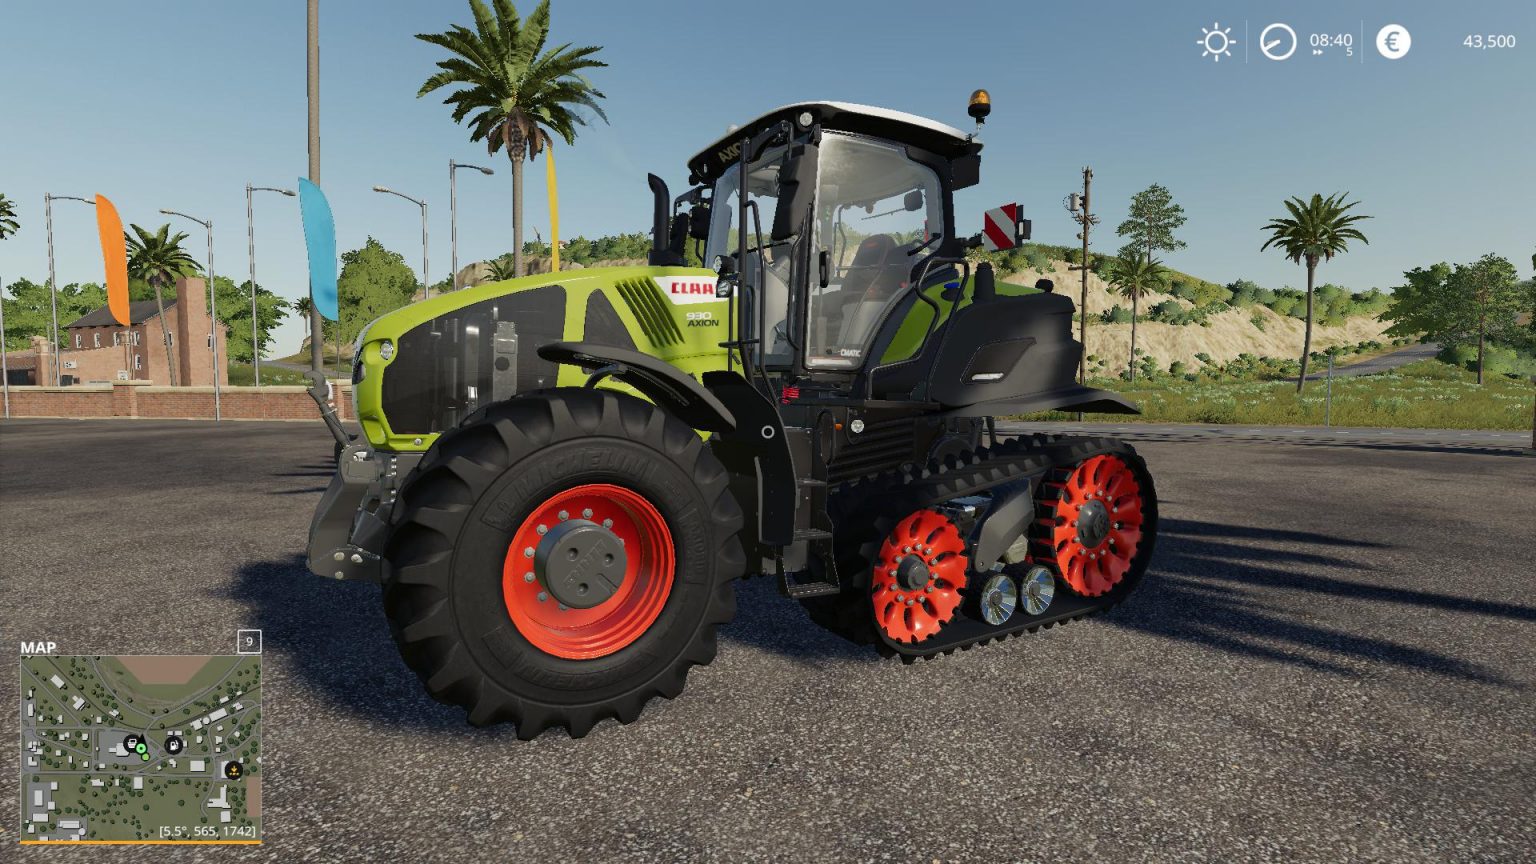 Ls2019 Claas Axion 900 V1002 Farming Simulator 22 Mod Ls22 Mod Images And Photos Finder 9111